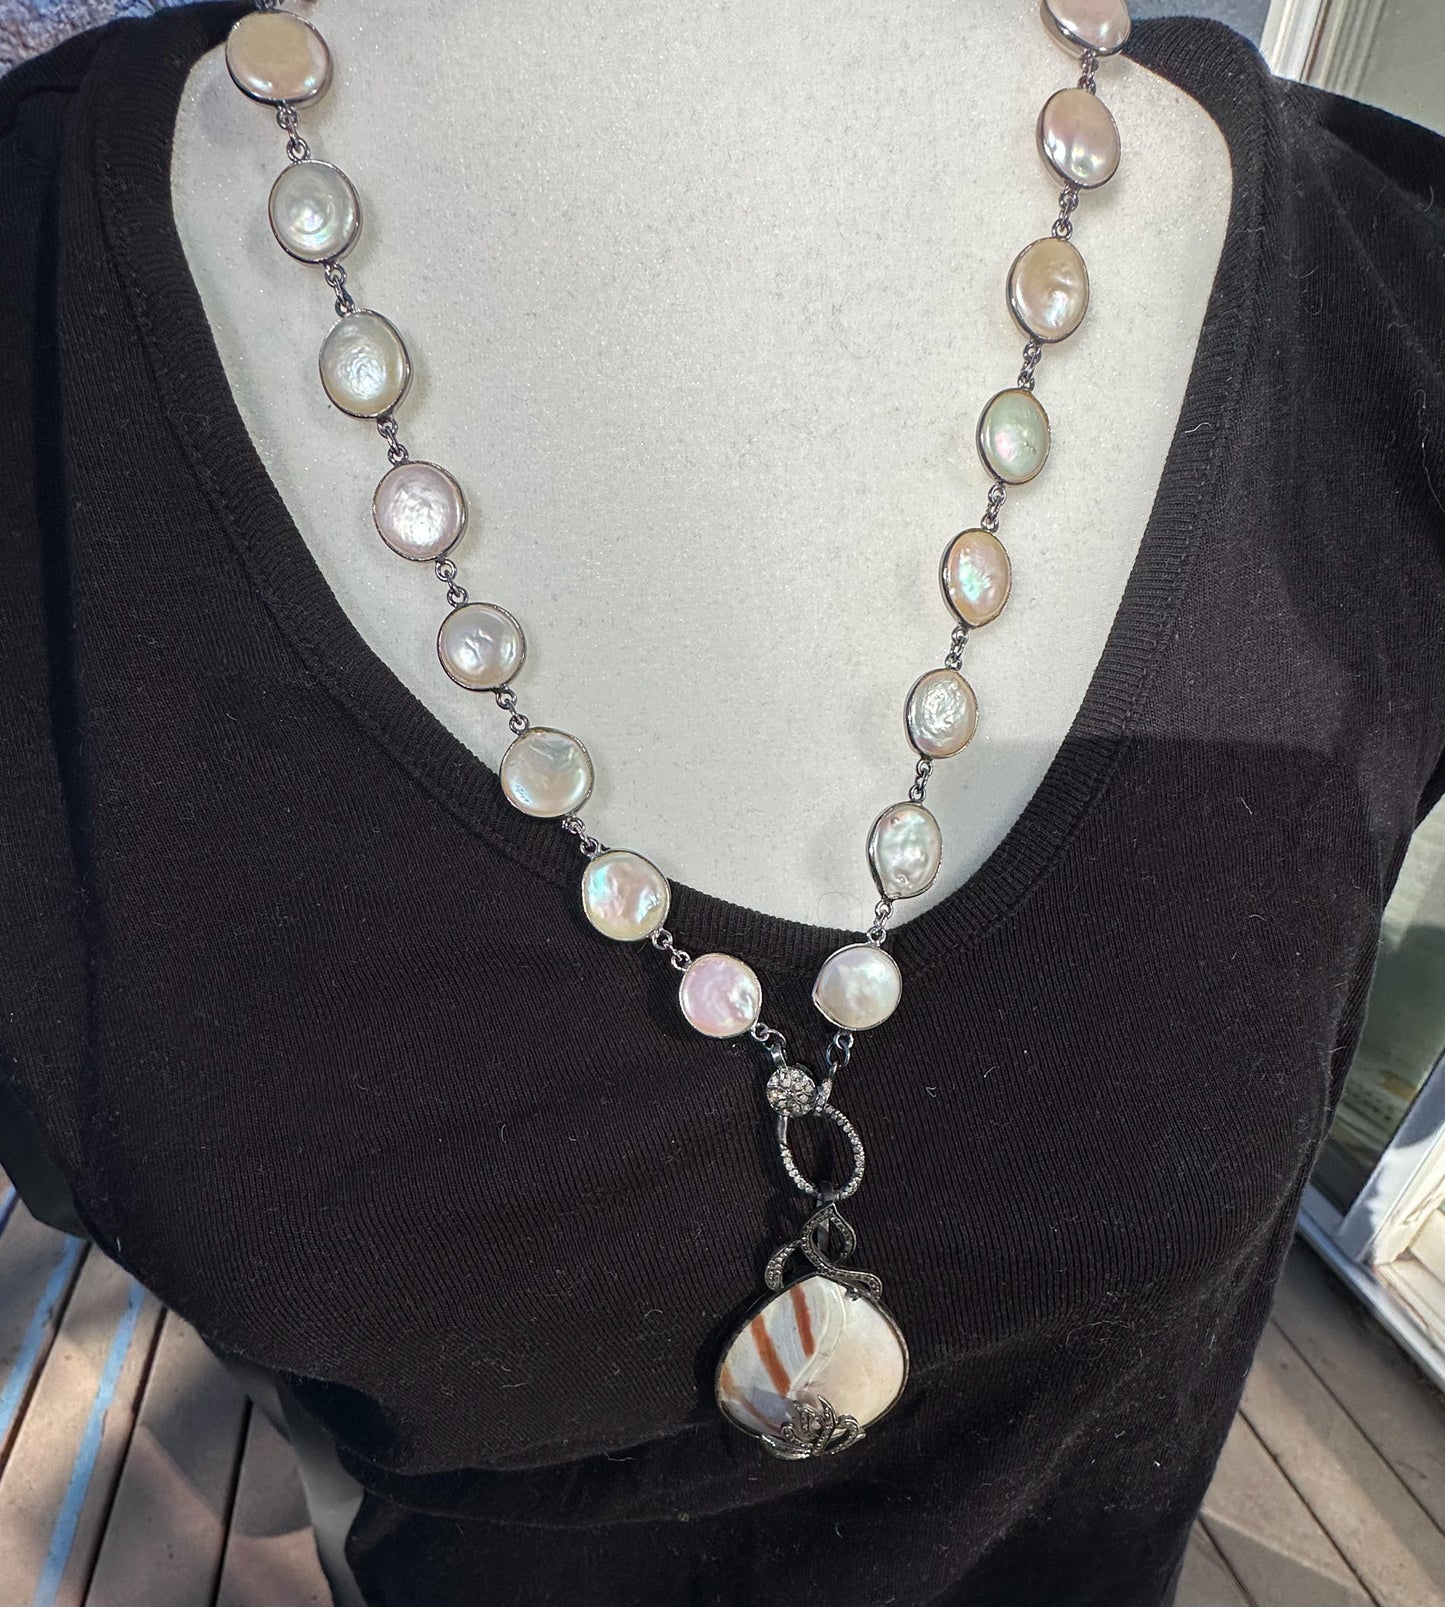 Mother of Pearl & Diamond Necklace